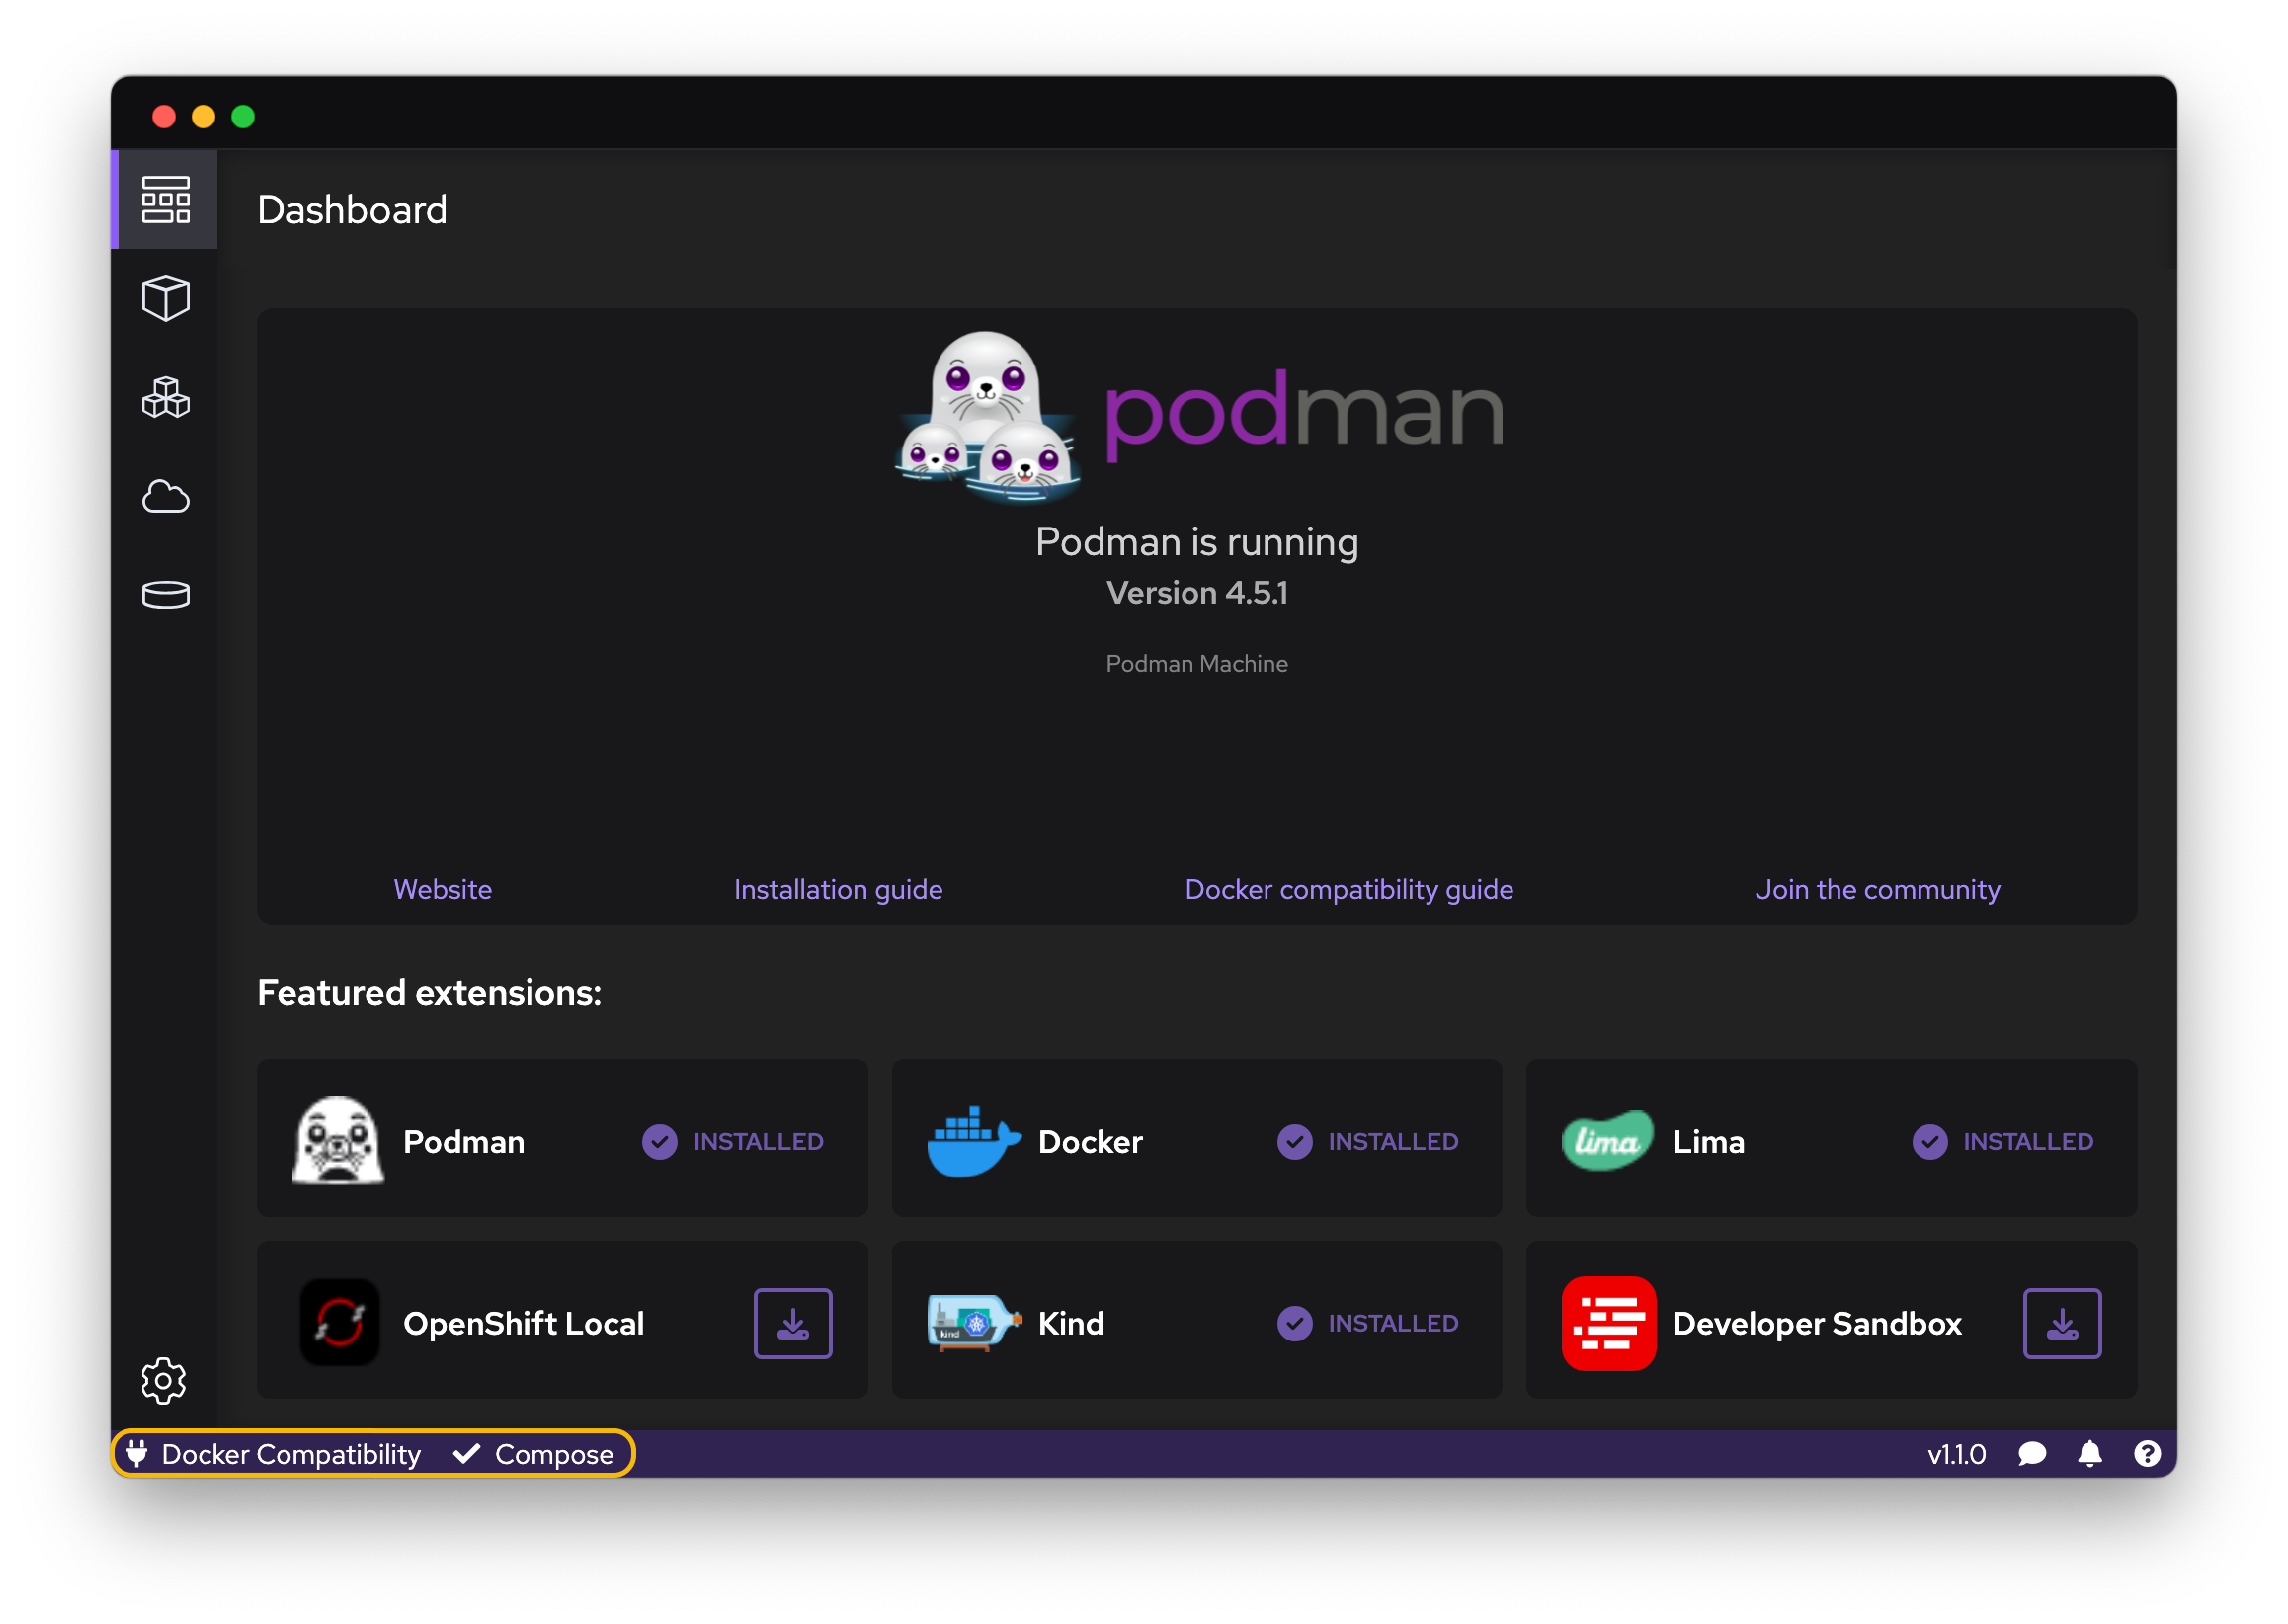 In the bottom-left side of the Podman Desktop GU, info is shown about the status of the Docker and Docker Compose compatibility in Podman.